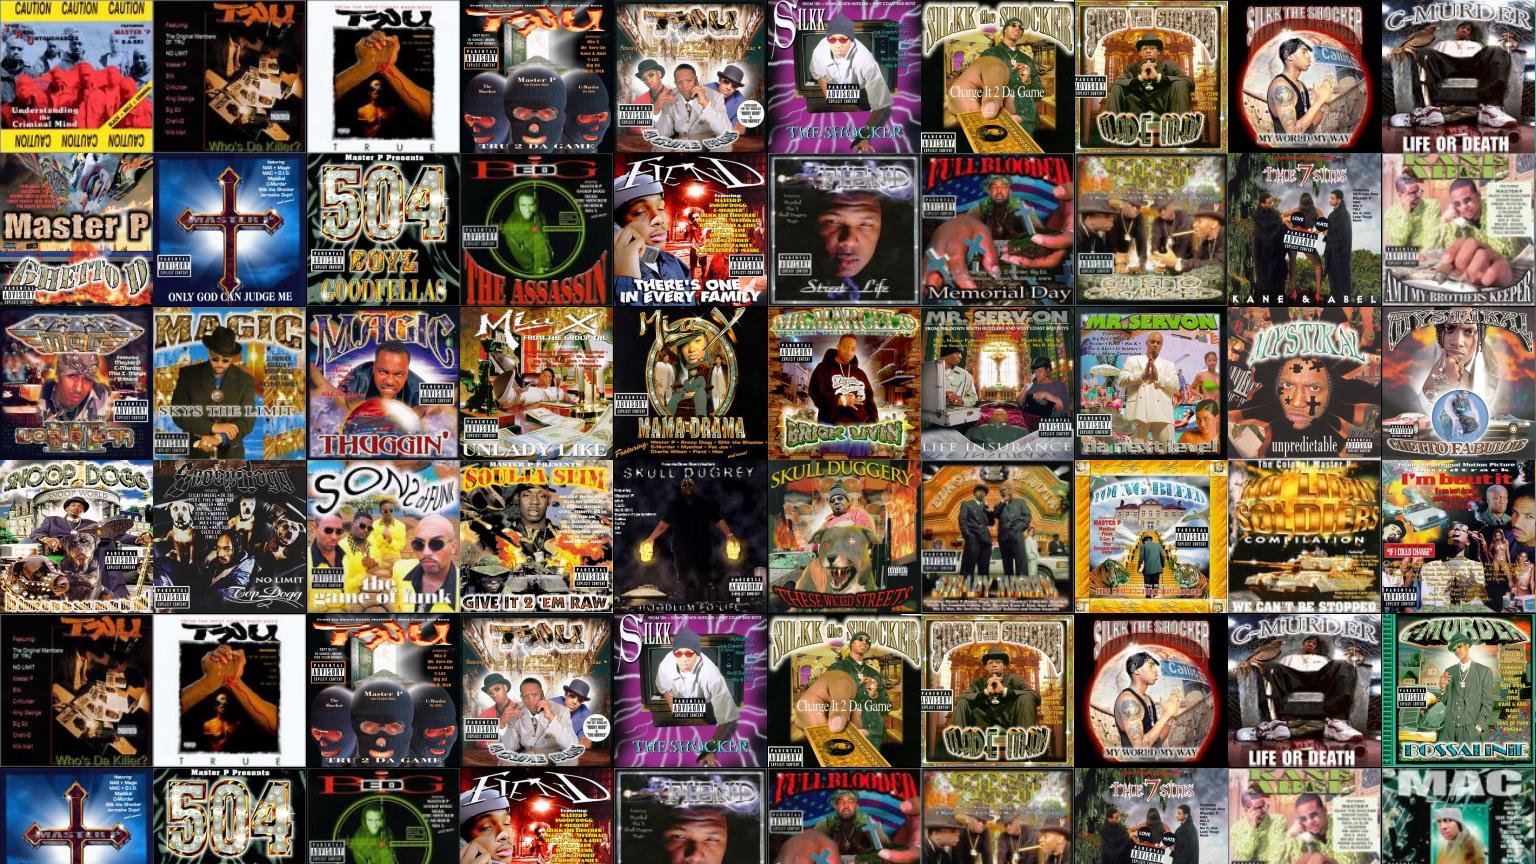 Download This Free Wallpaper With Images Of Tru Understanding - No Limit Records Coming Soon , HD Wallpaper & Backgrounds